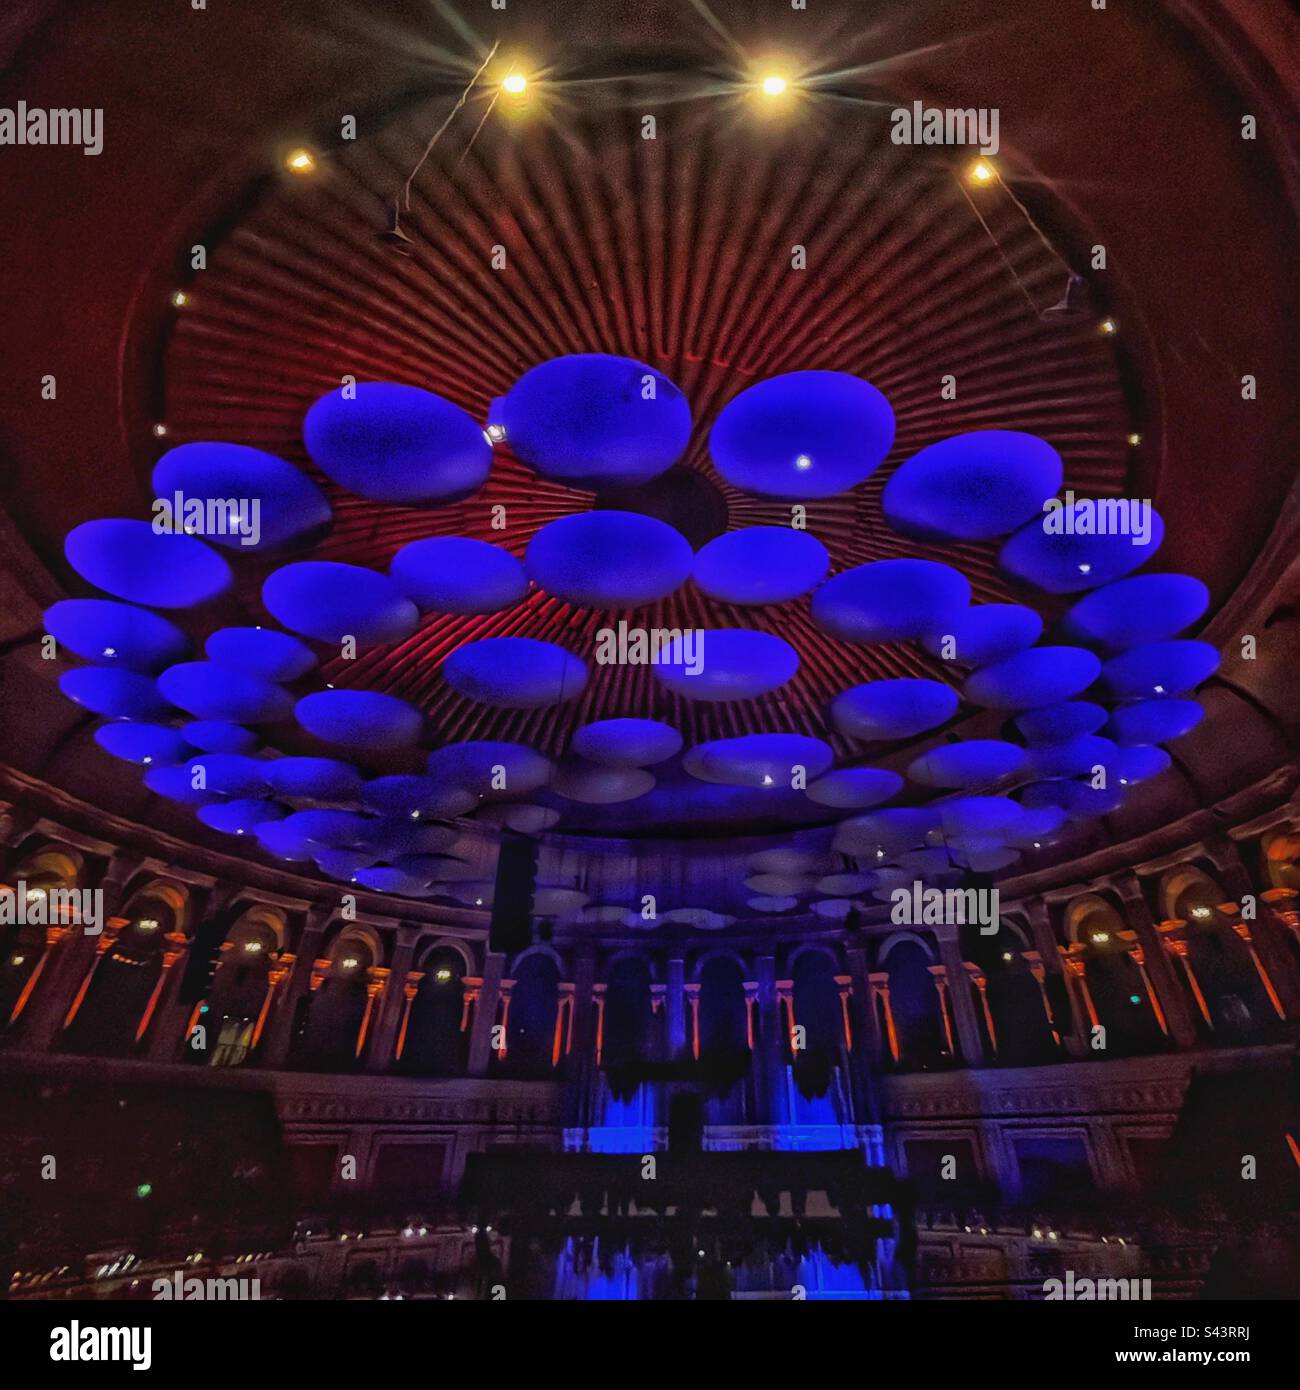 fibreglass acoustic diffusers nicknamed ‘mushrooms’ on the ceiling at the Royal Albert Hall in London, a Listed Building and heritage landmark. The rousing circle is shown. Stock Photo